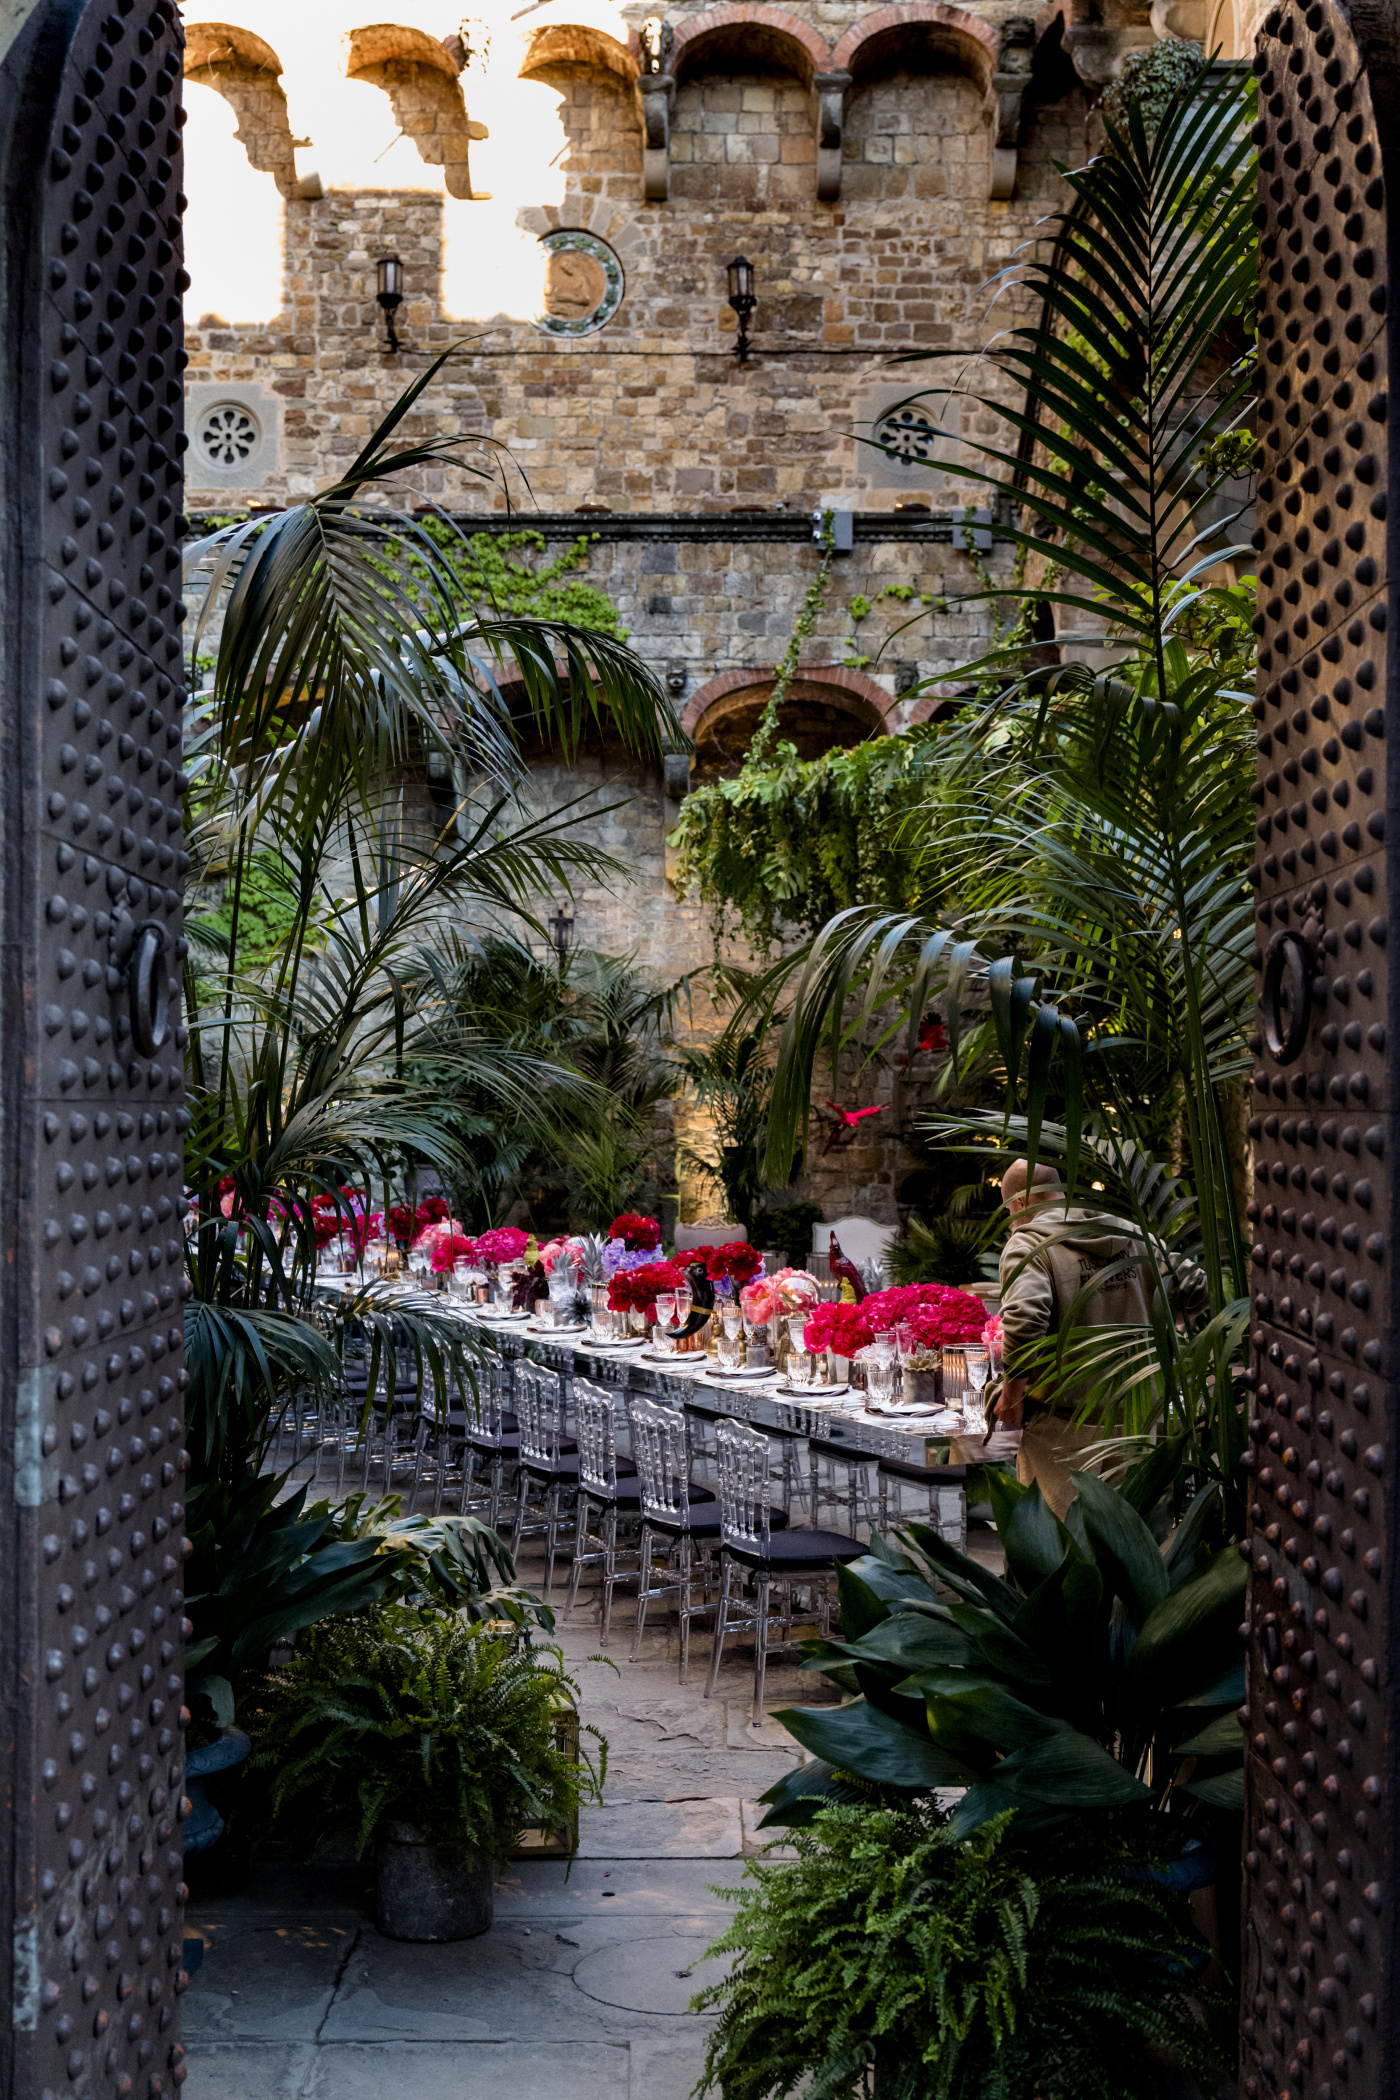 Castle courtyard decorated with plants and hanging greenery for a jungle effect